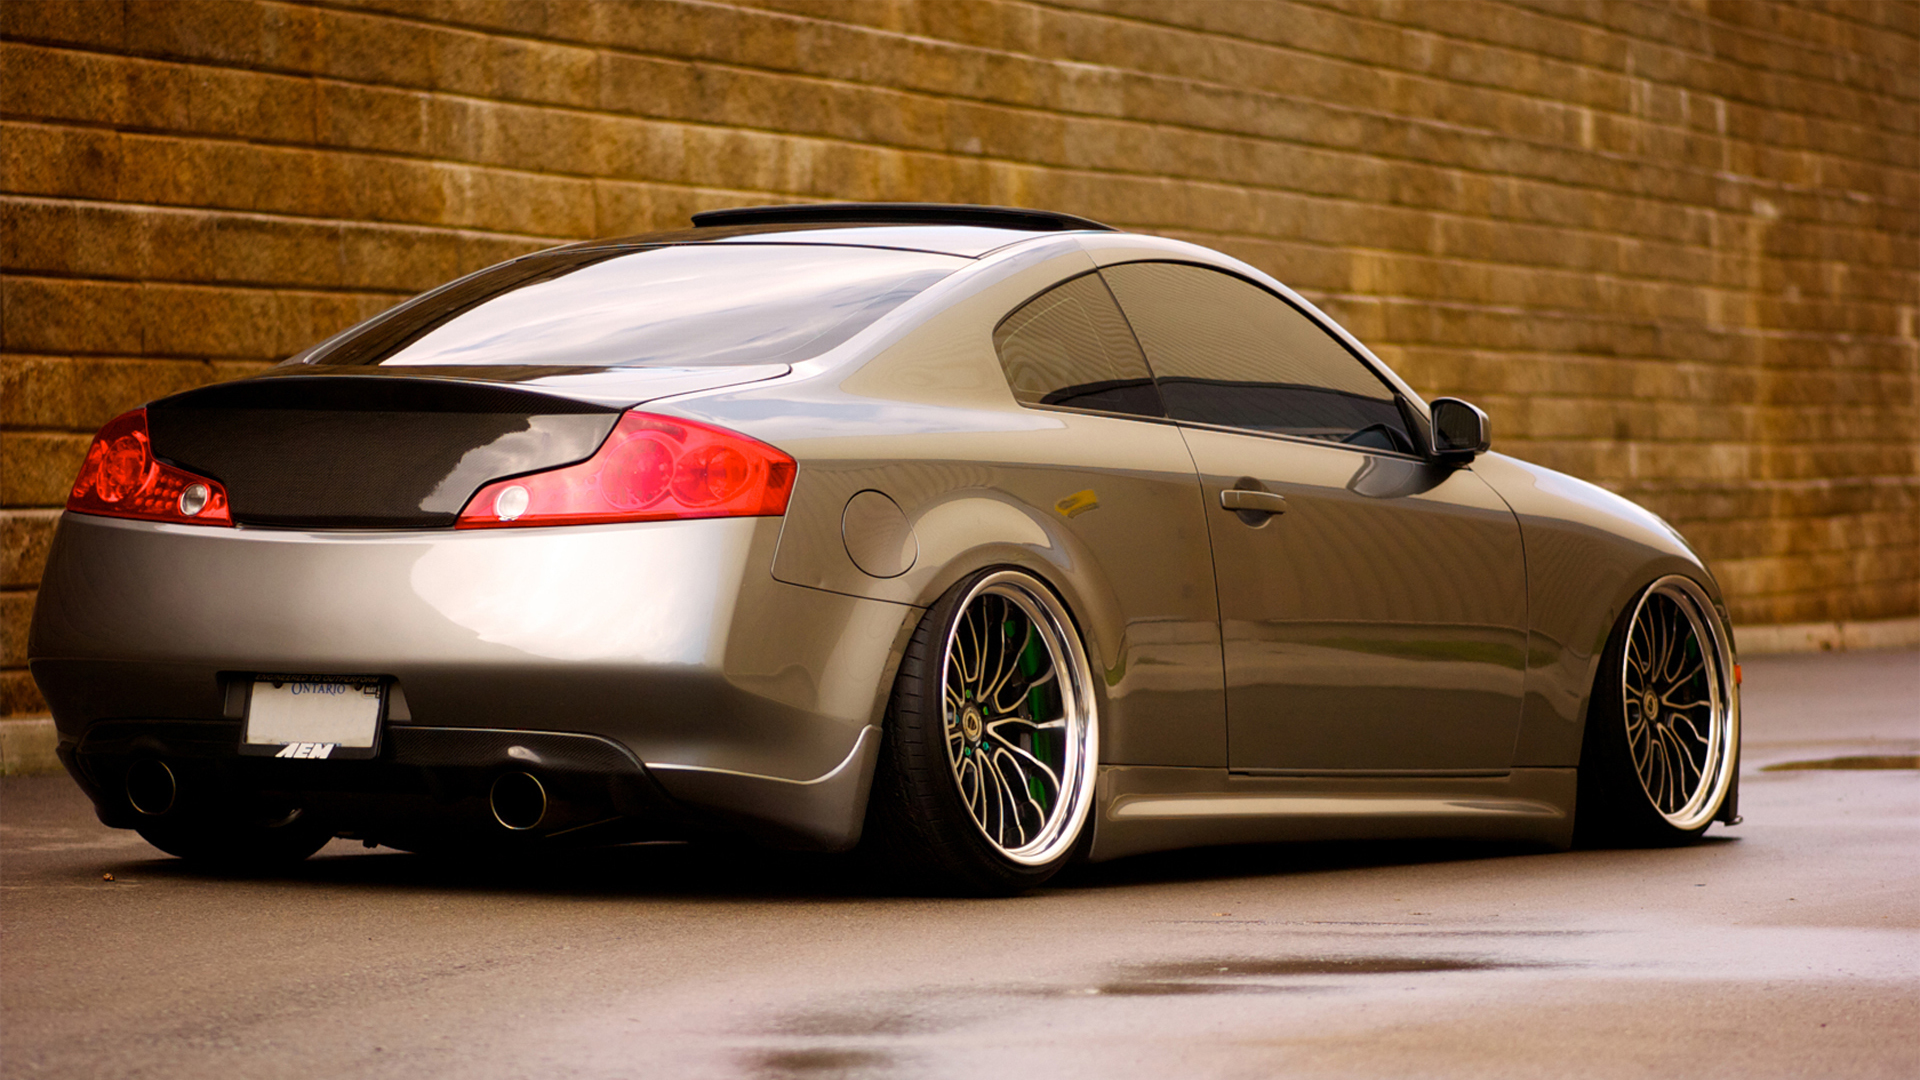 Cool Wallpaper Of Infiniti G35 Picture Coupe Low